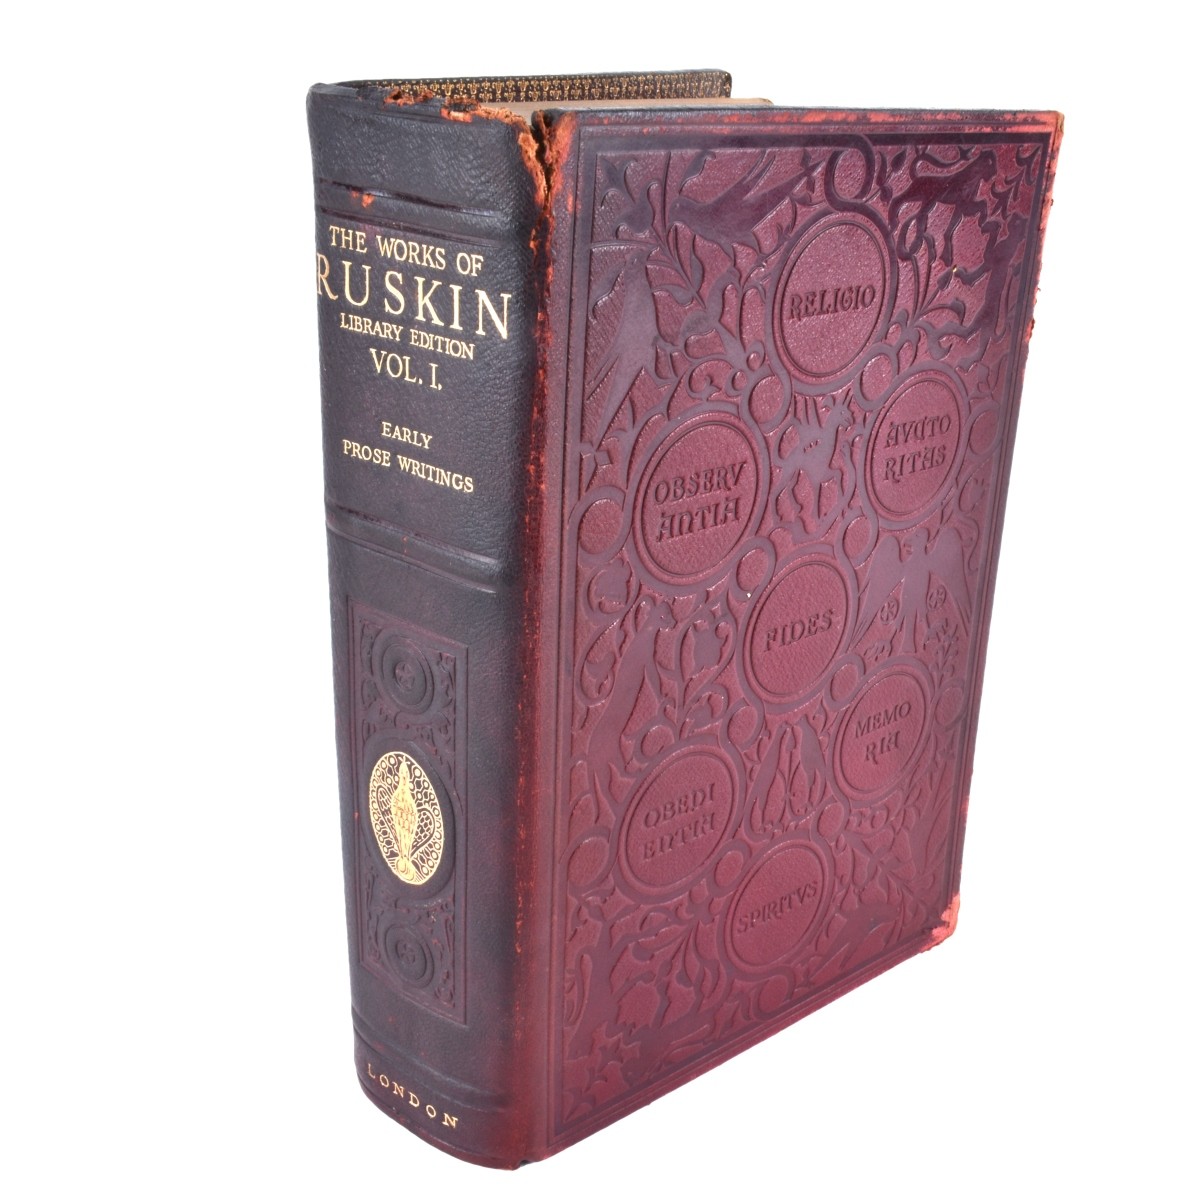 The Complete Works of John Ruskin 39 Hardcover Vol